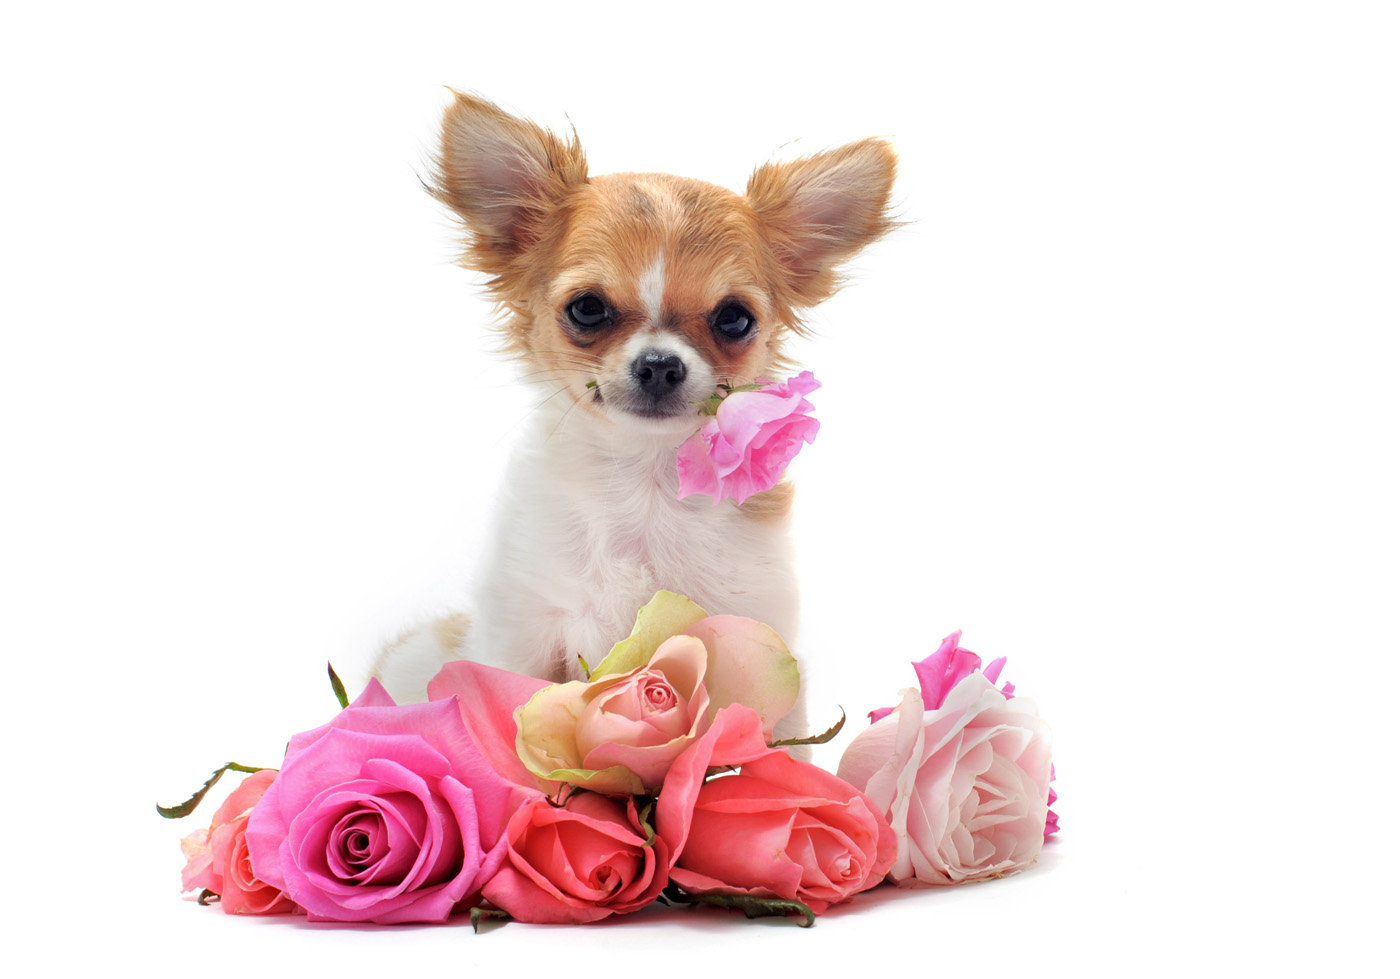 Cute Dog Pictures with Flowers